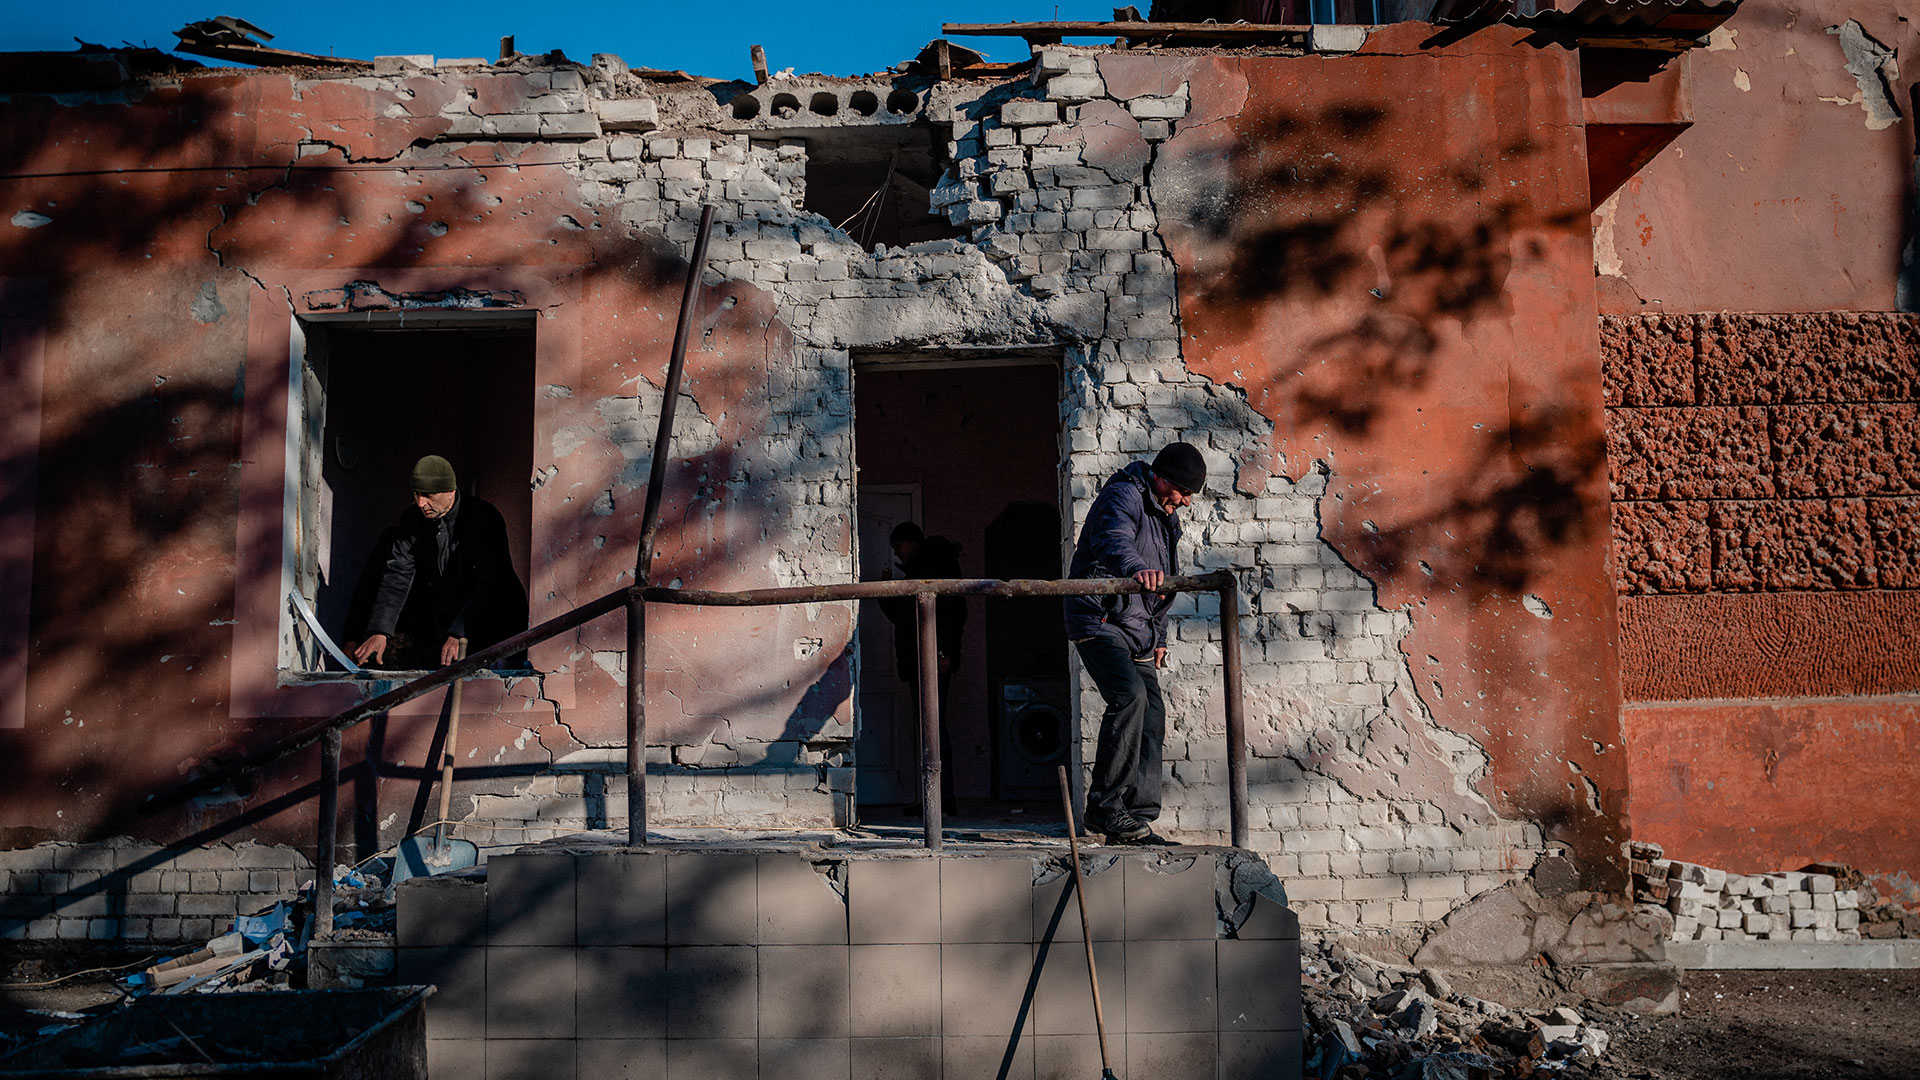 Workers remove rubble after the Russian bombing of the maternity unit in a hospital in Kherson, southern Ukraine, on December 28, 2022. (Photo by Dimitar Delkov/AFP)